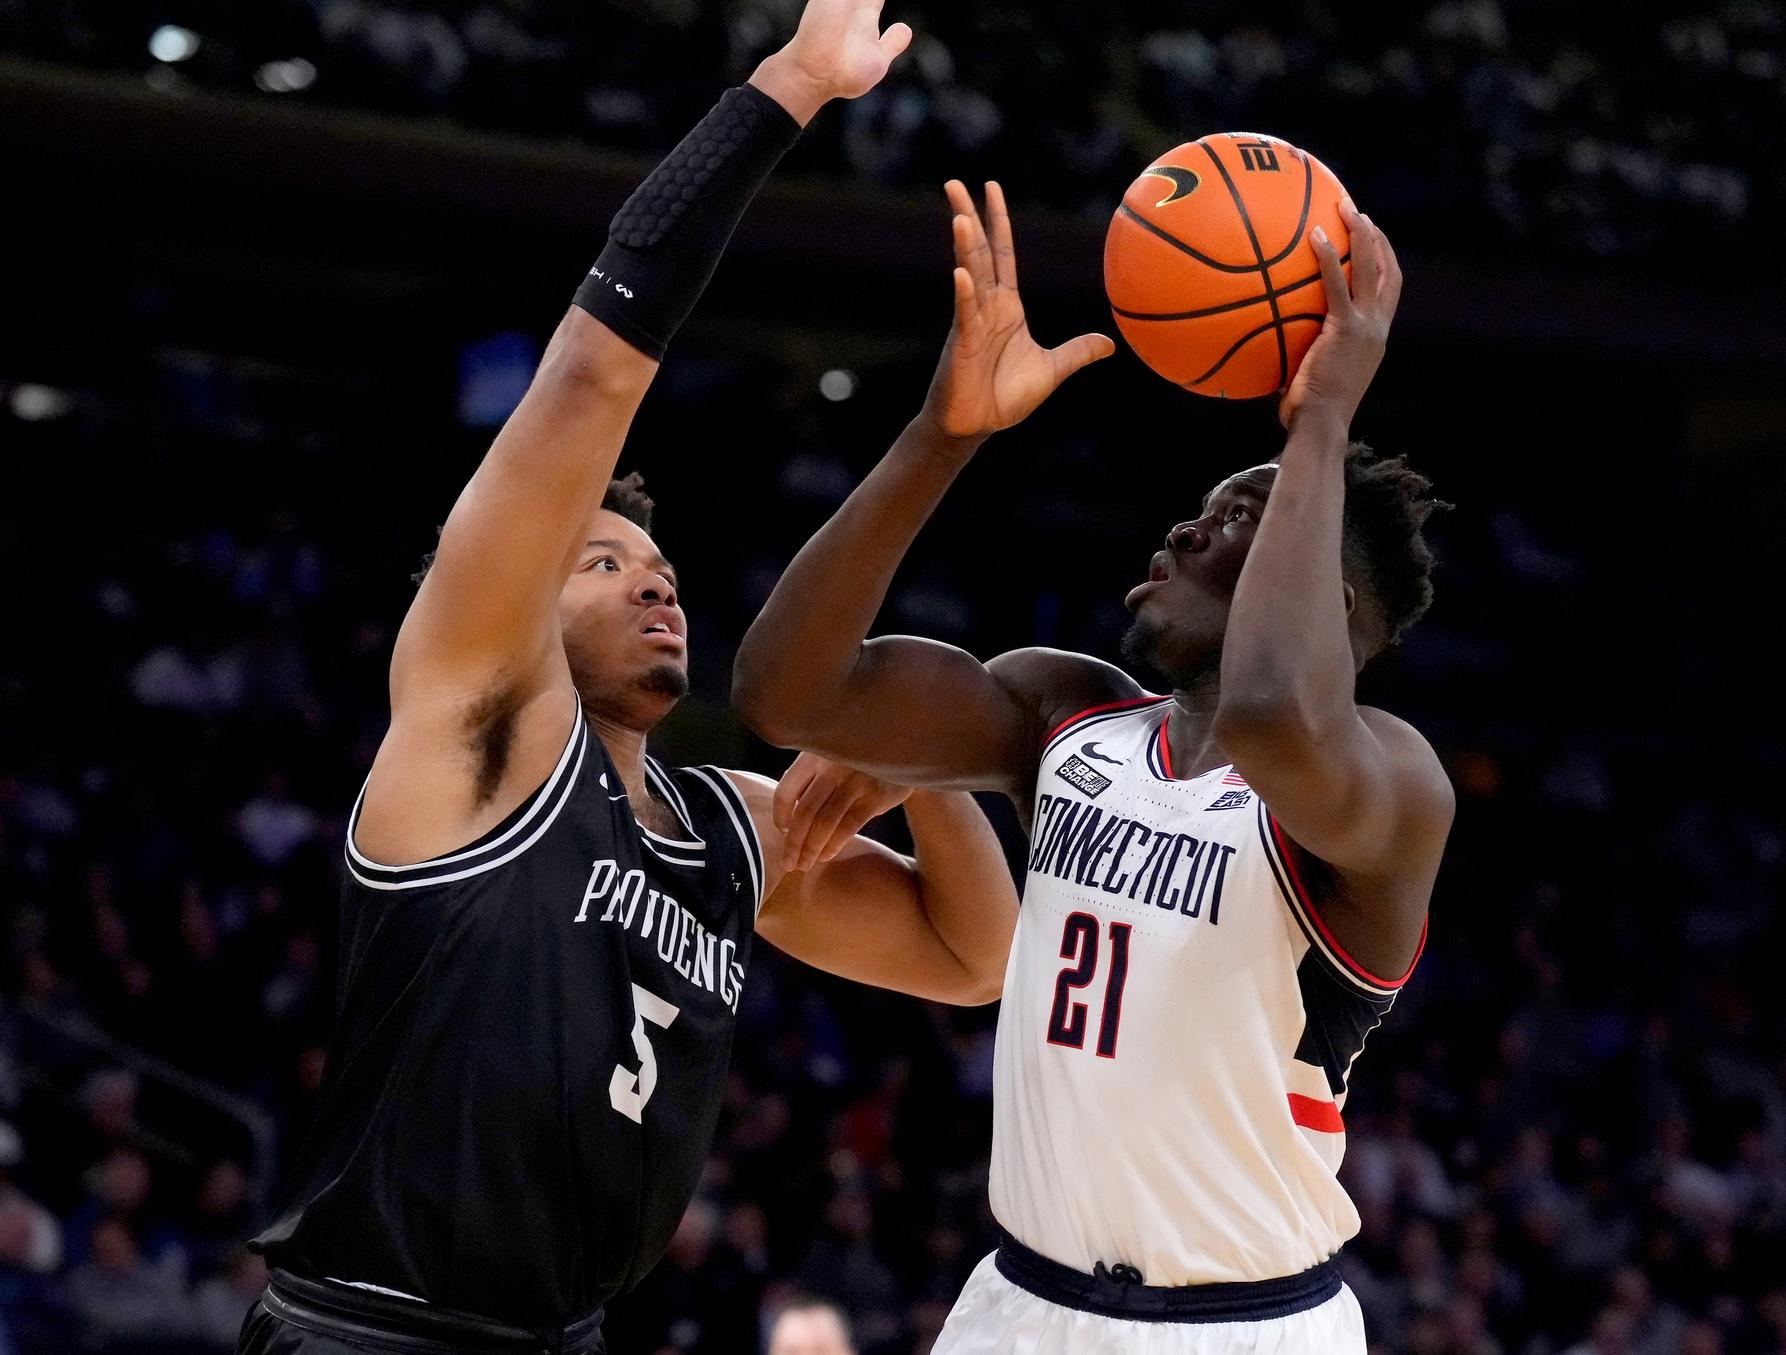 Connecticut Huskies forward Adama Sanogo (21) shoots past Providence Friars forward Ed Croswell (5) in the first half at Madison Square Garden. / Robert Deutsch-USA TODAY Sports